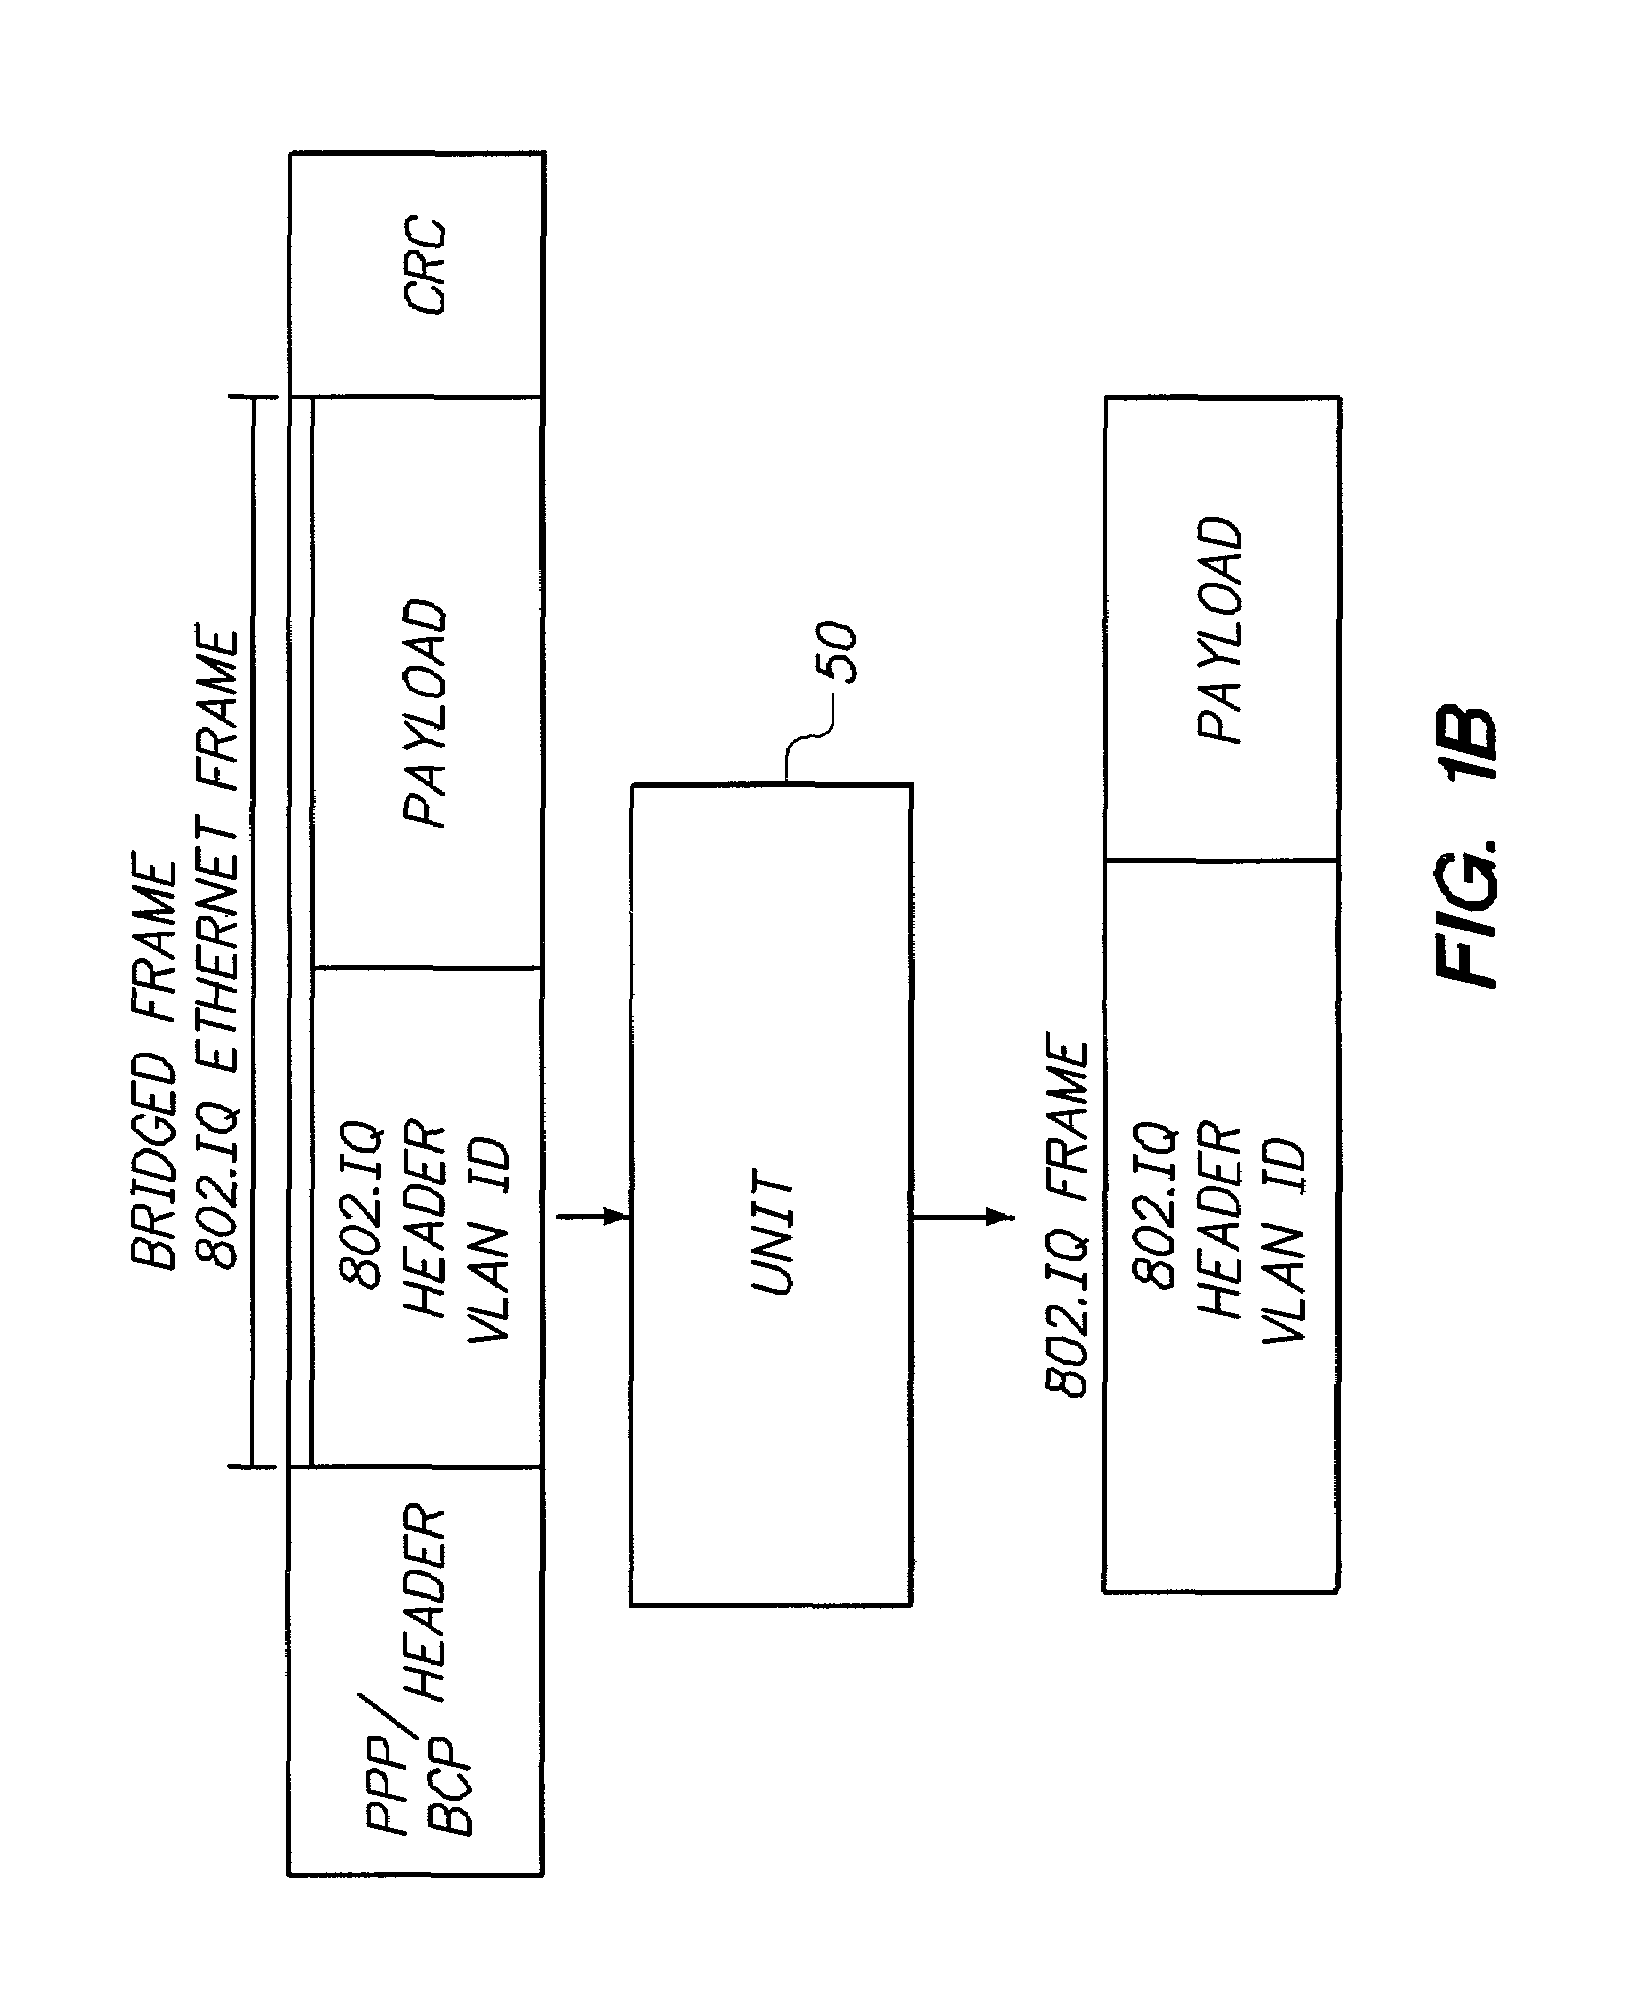 System and method for connecting geographically distributed virtual local area networks